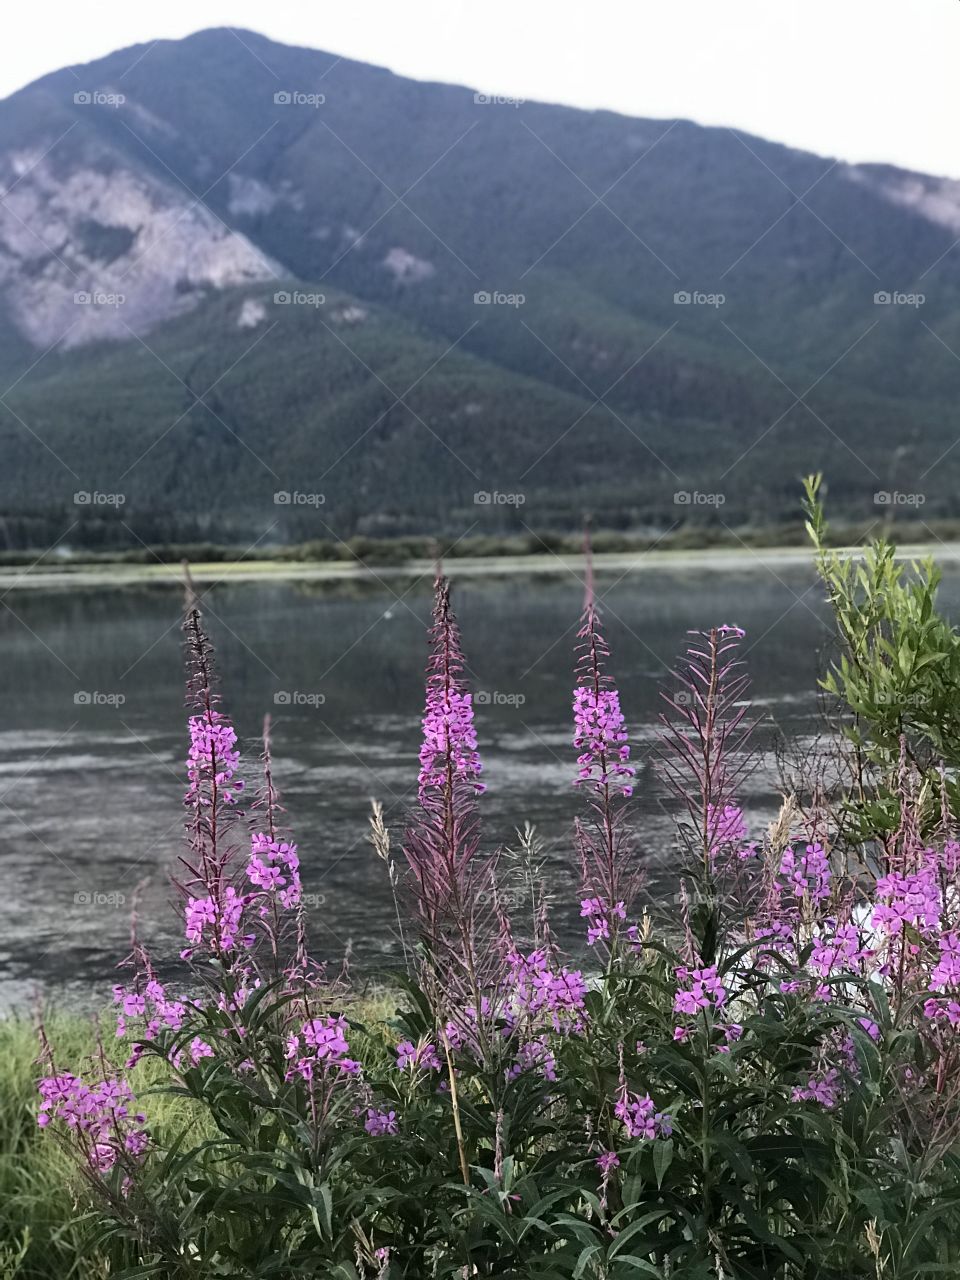 Sunrise in Banff. Canada over Vermilion Lakes with the steam rising and the Rockies in the background.  Purple flowers along the water’s edge.